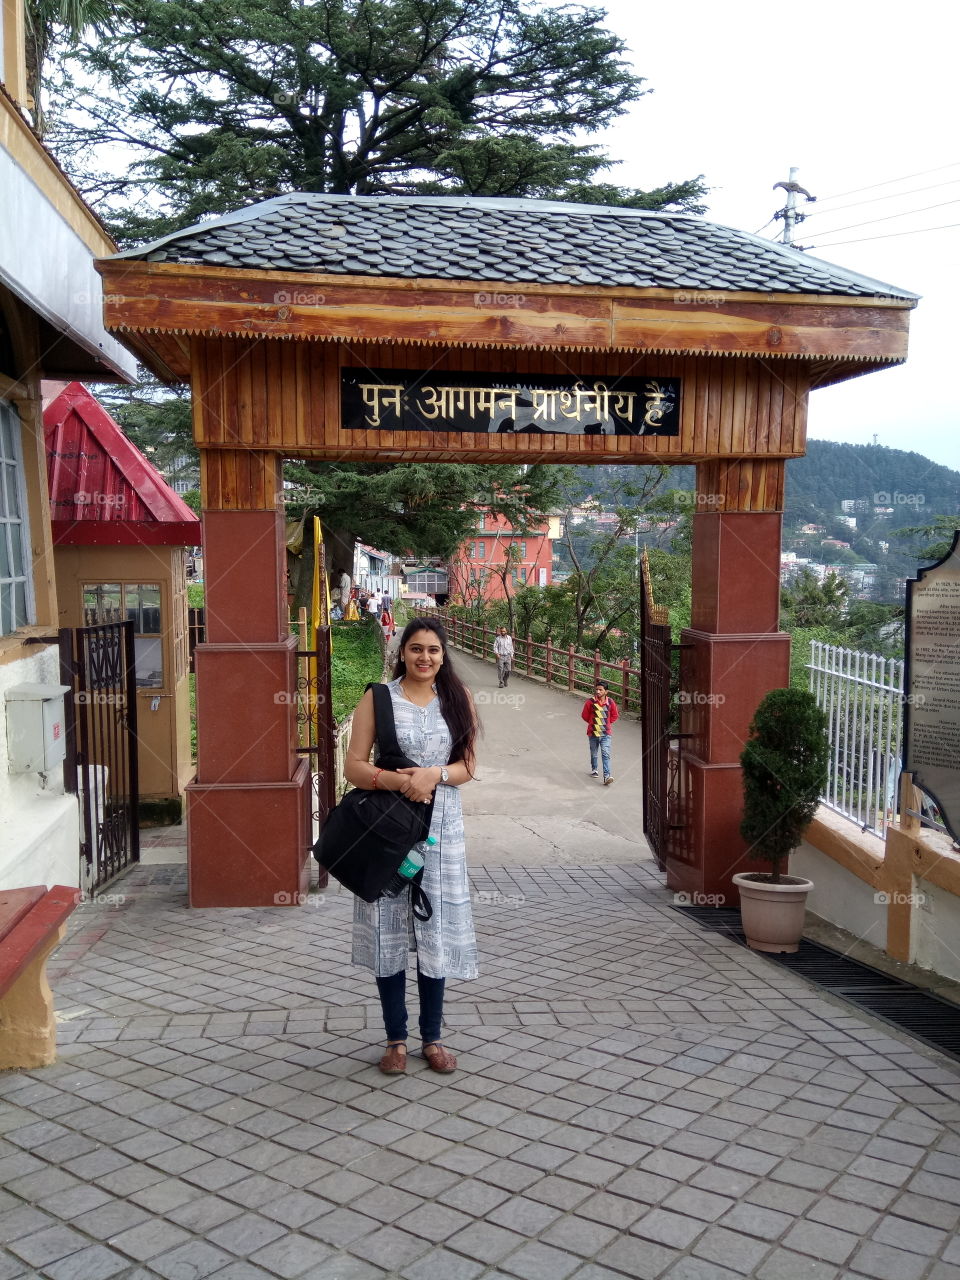 Grand hotel shimla entrance, cold weather, nice food and great place to visit